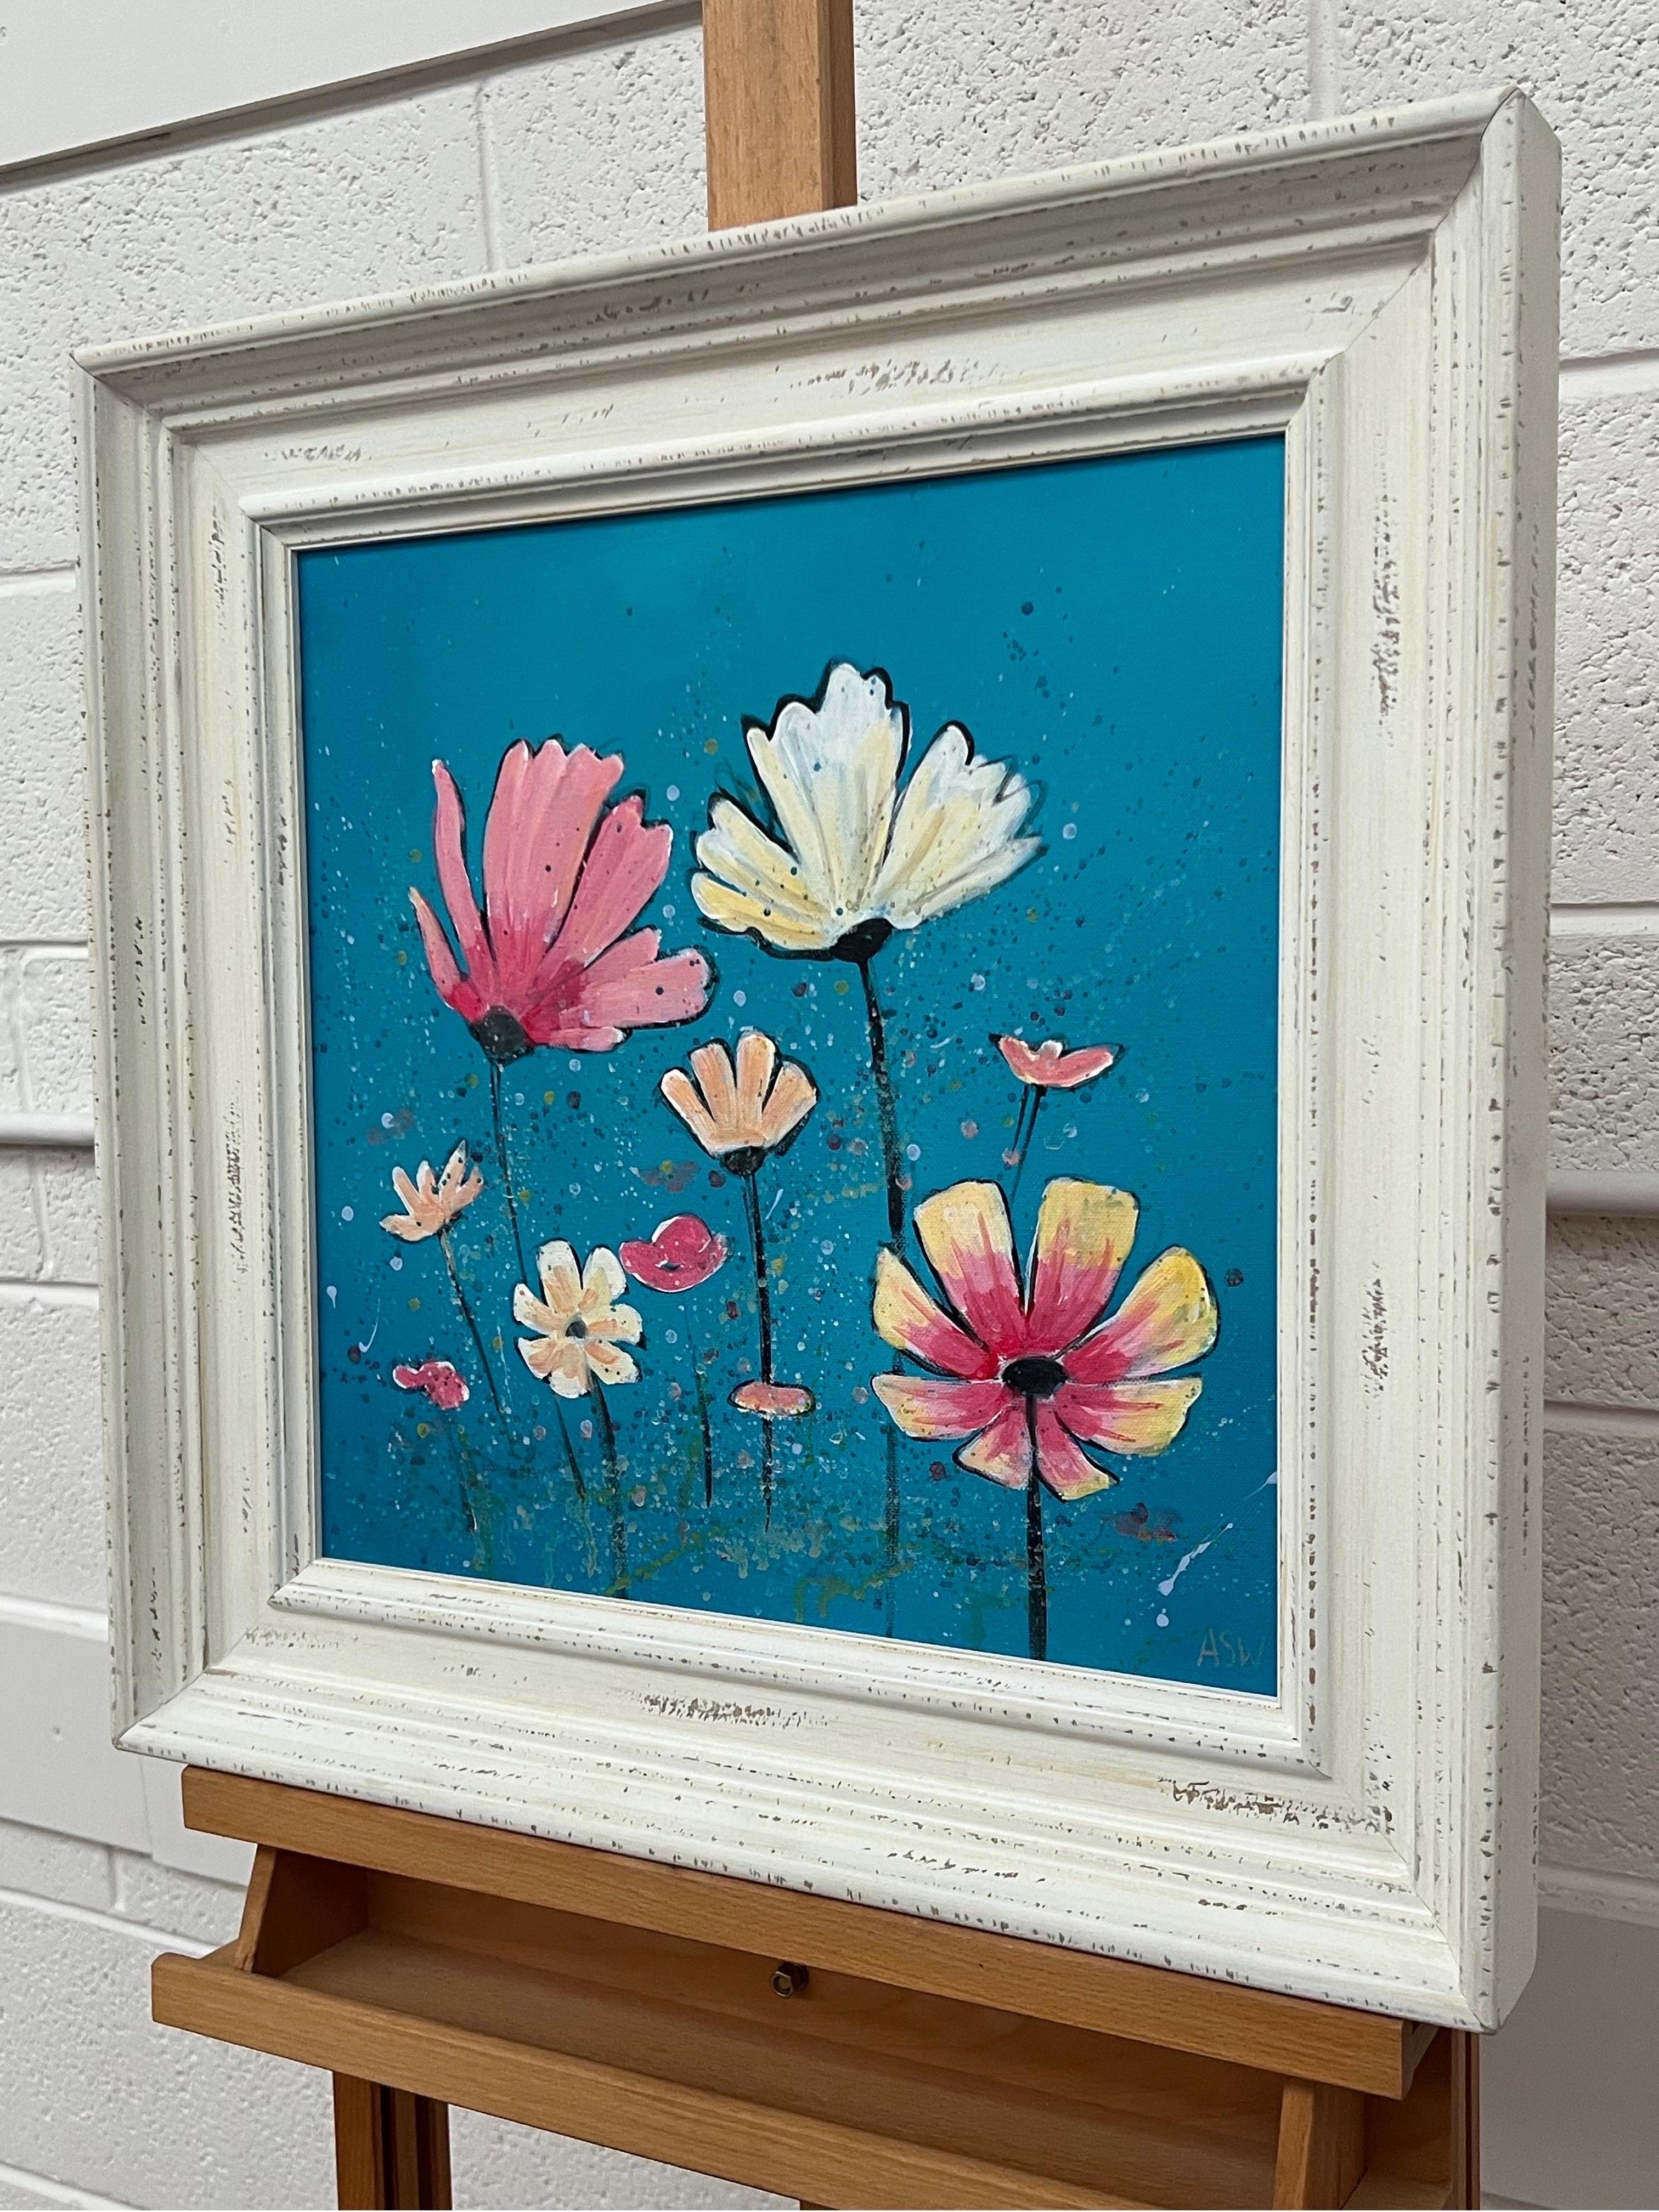 Design Study of Wild Pink & White Flowers on a Turquoise Background by Contemporary British Artist, Angela Wakefield.

Art measures 16 x 16 inches
Frame measures 22 x 22 inches

Angela Wakefield has twice been on the front cover of ‘Art of England’